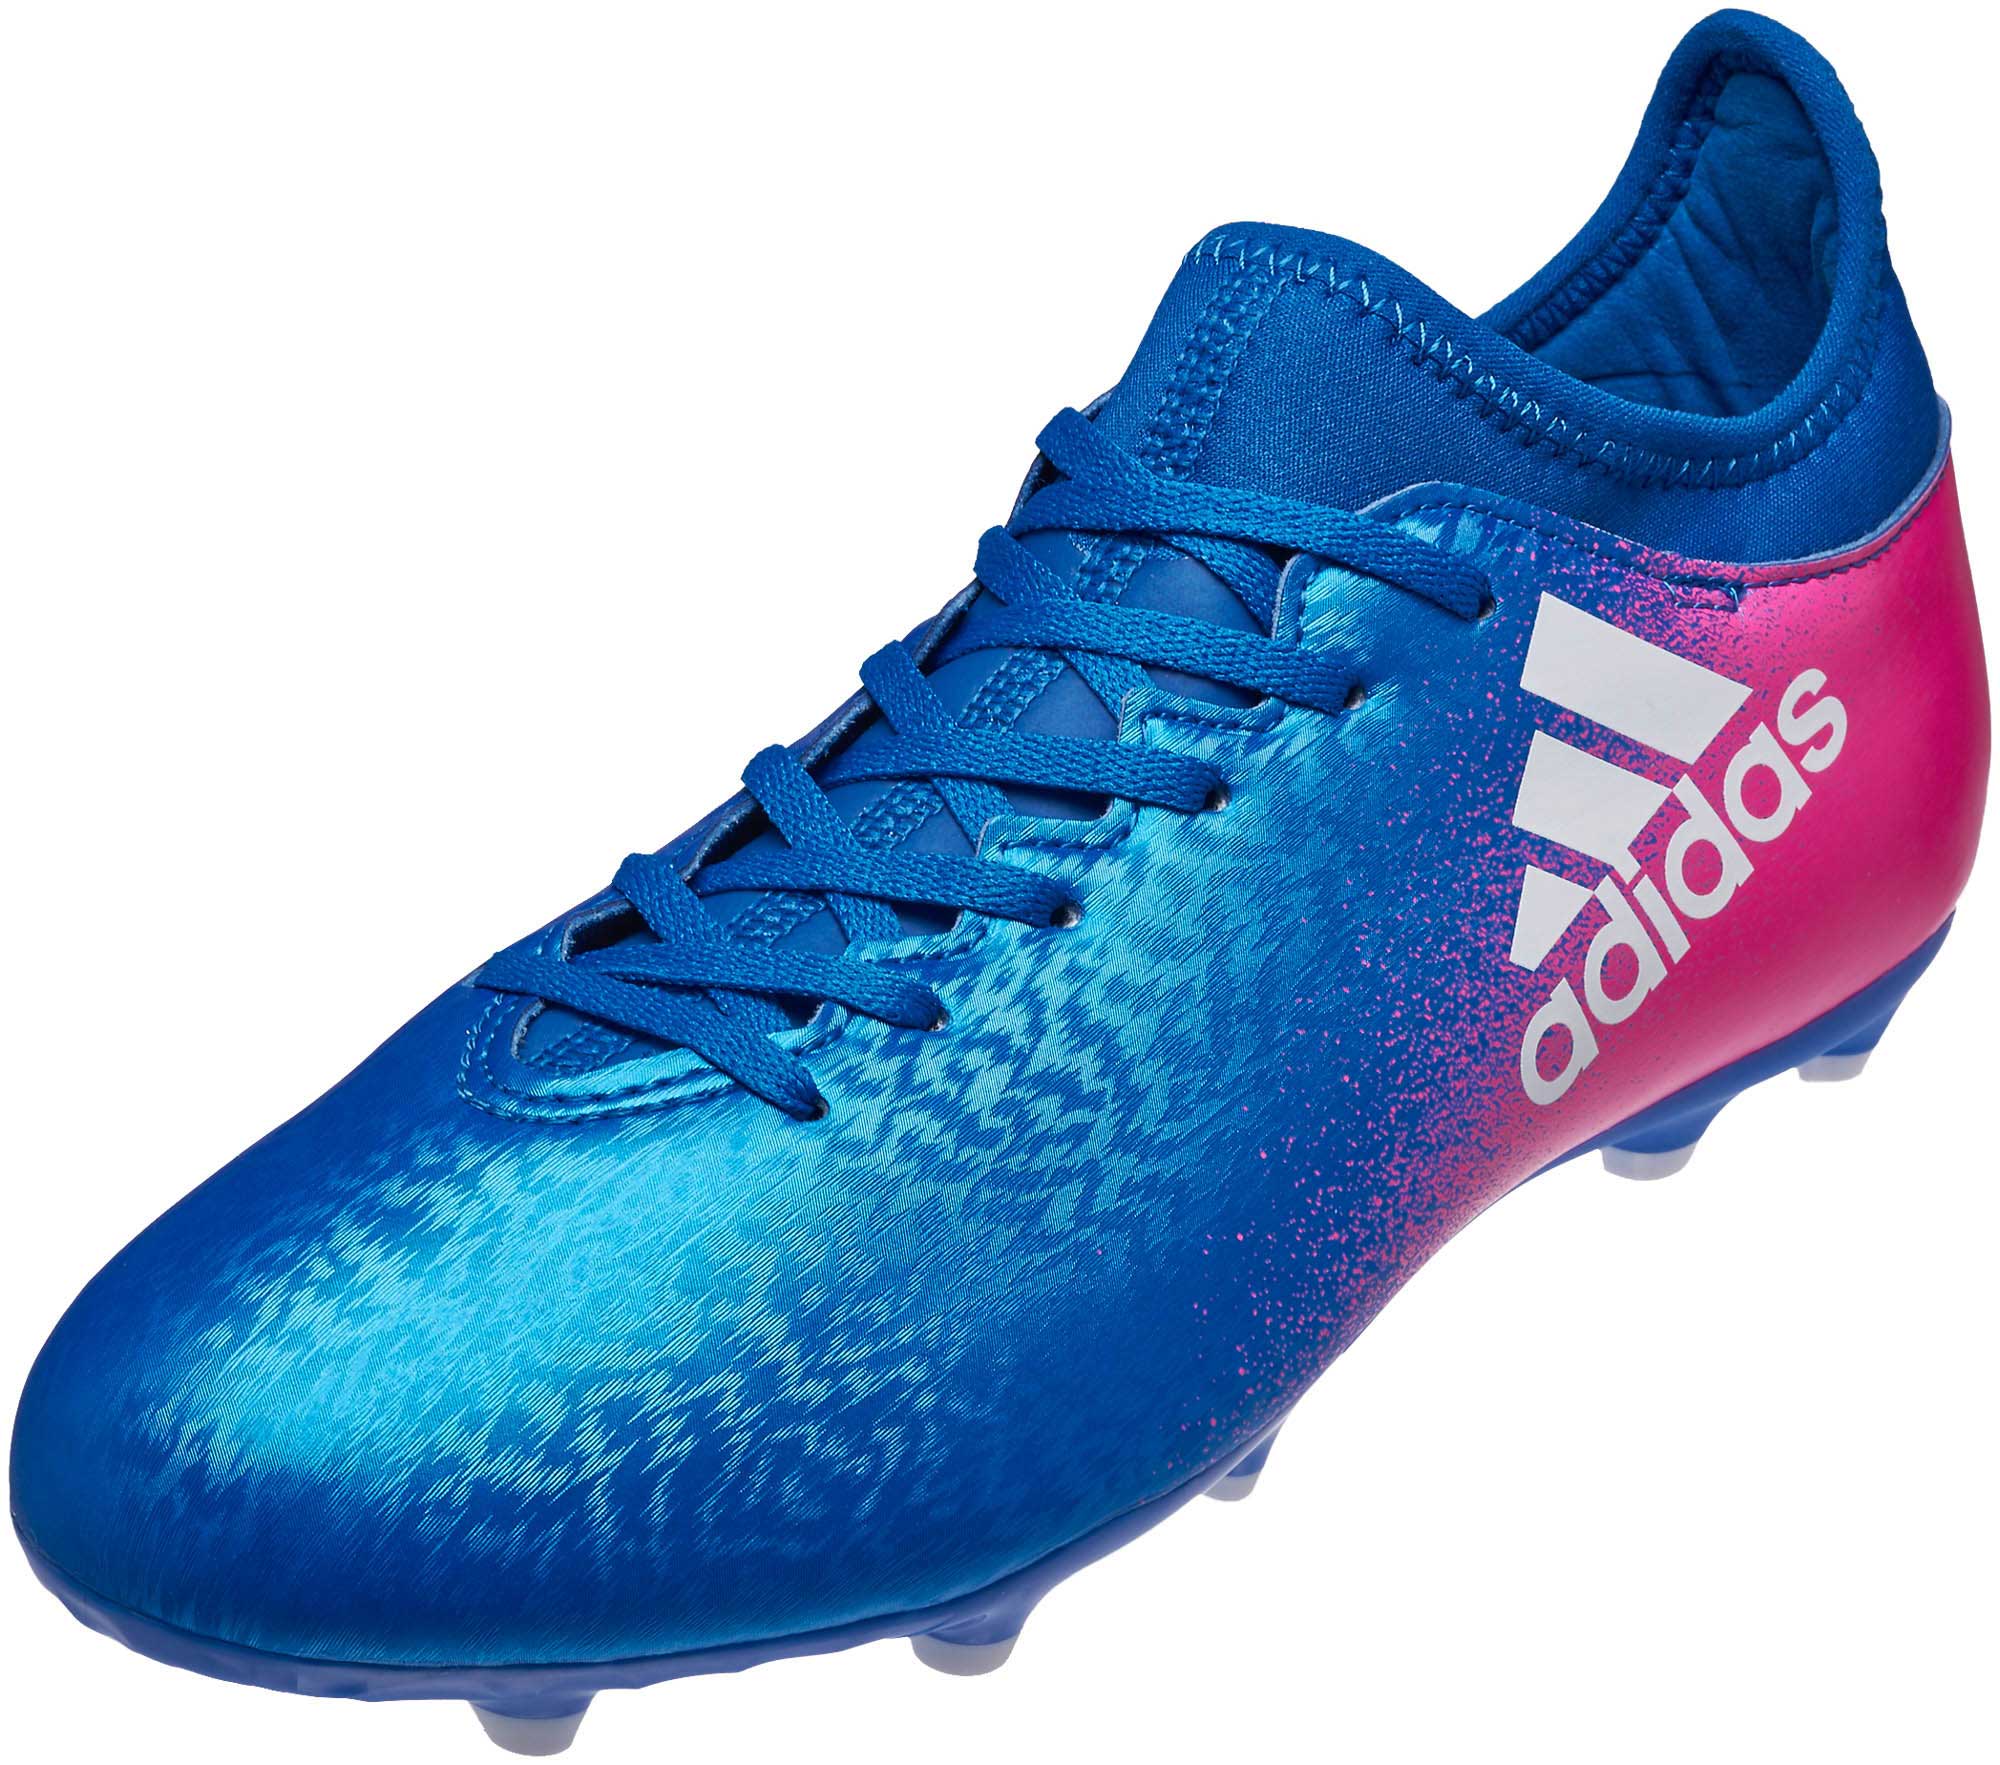 Buy > youth pink soccer cleats > in stock